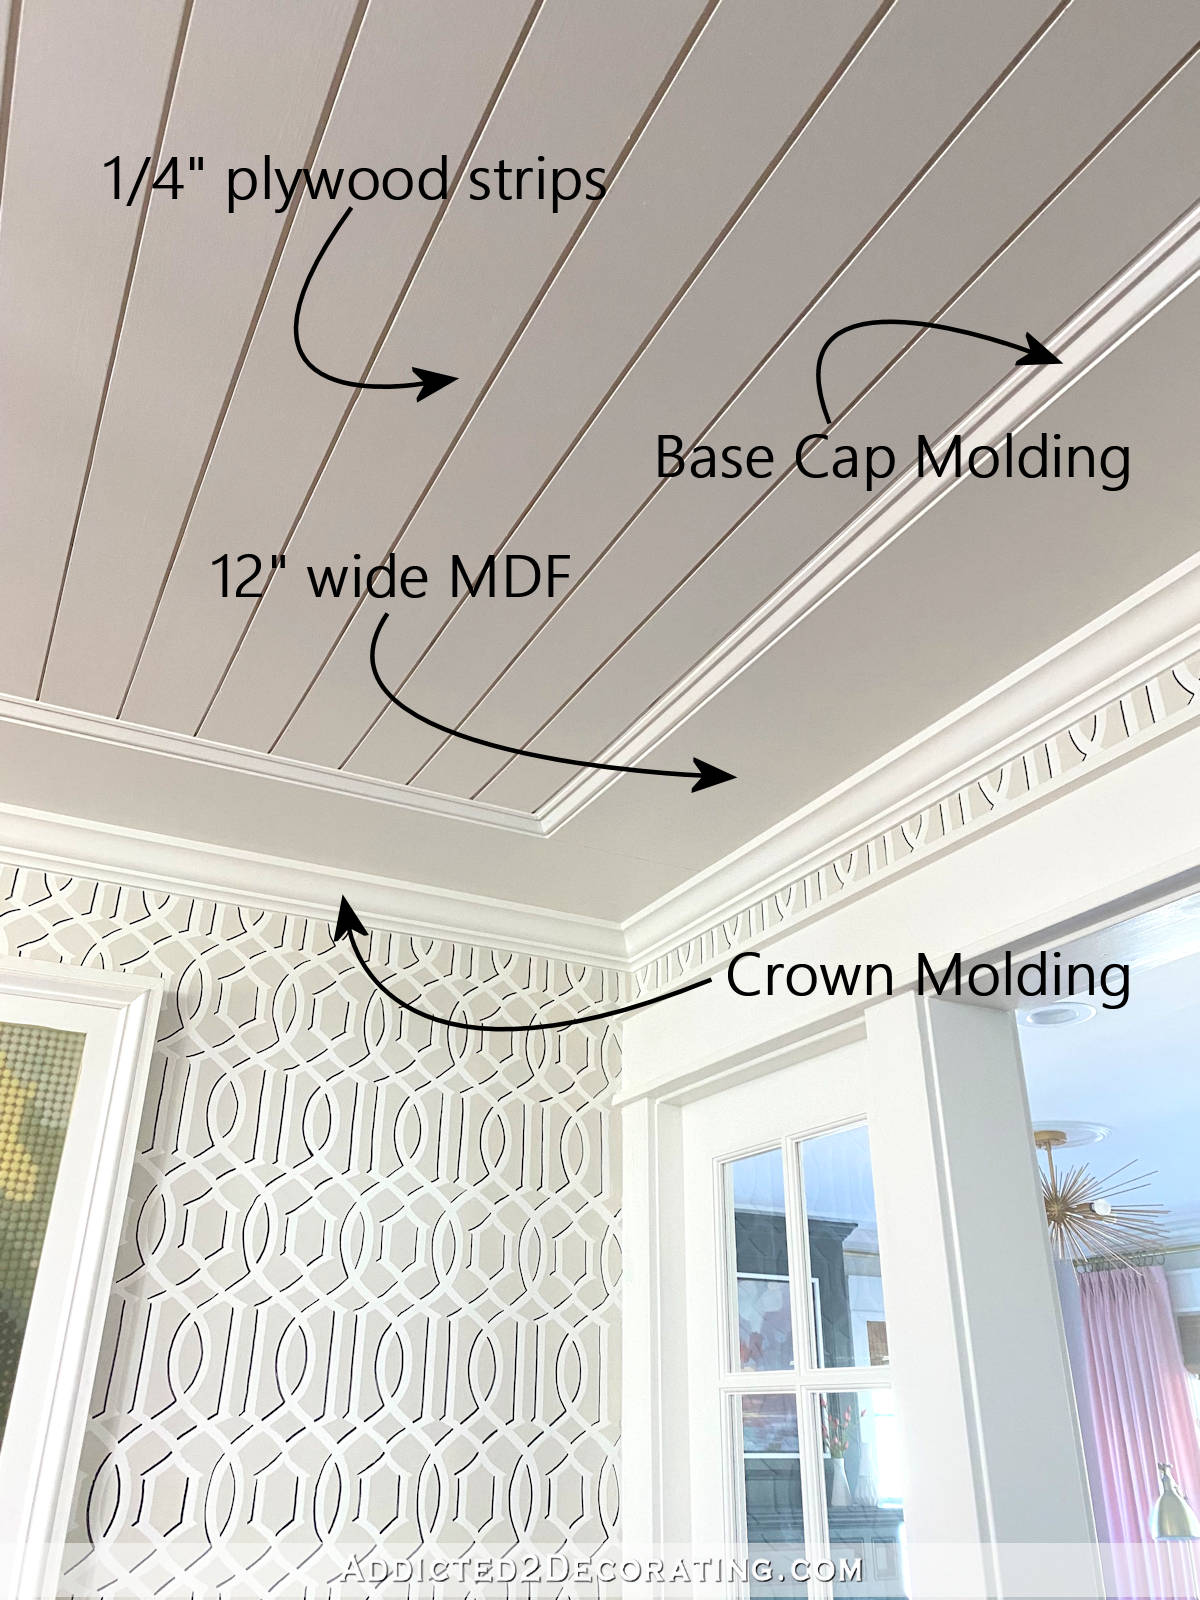 Three Ways To Enhance The Look Of Plain Crown Molding 1 Music Room Ceiling Details Of Trim Used 